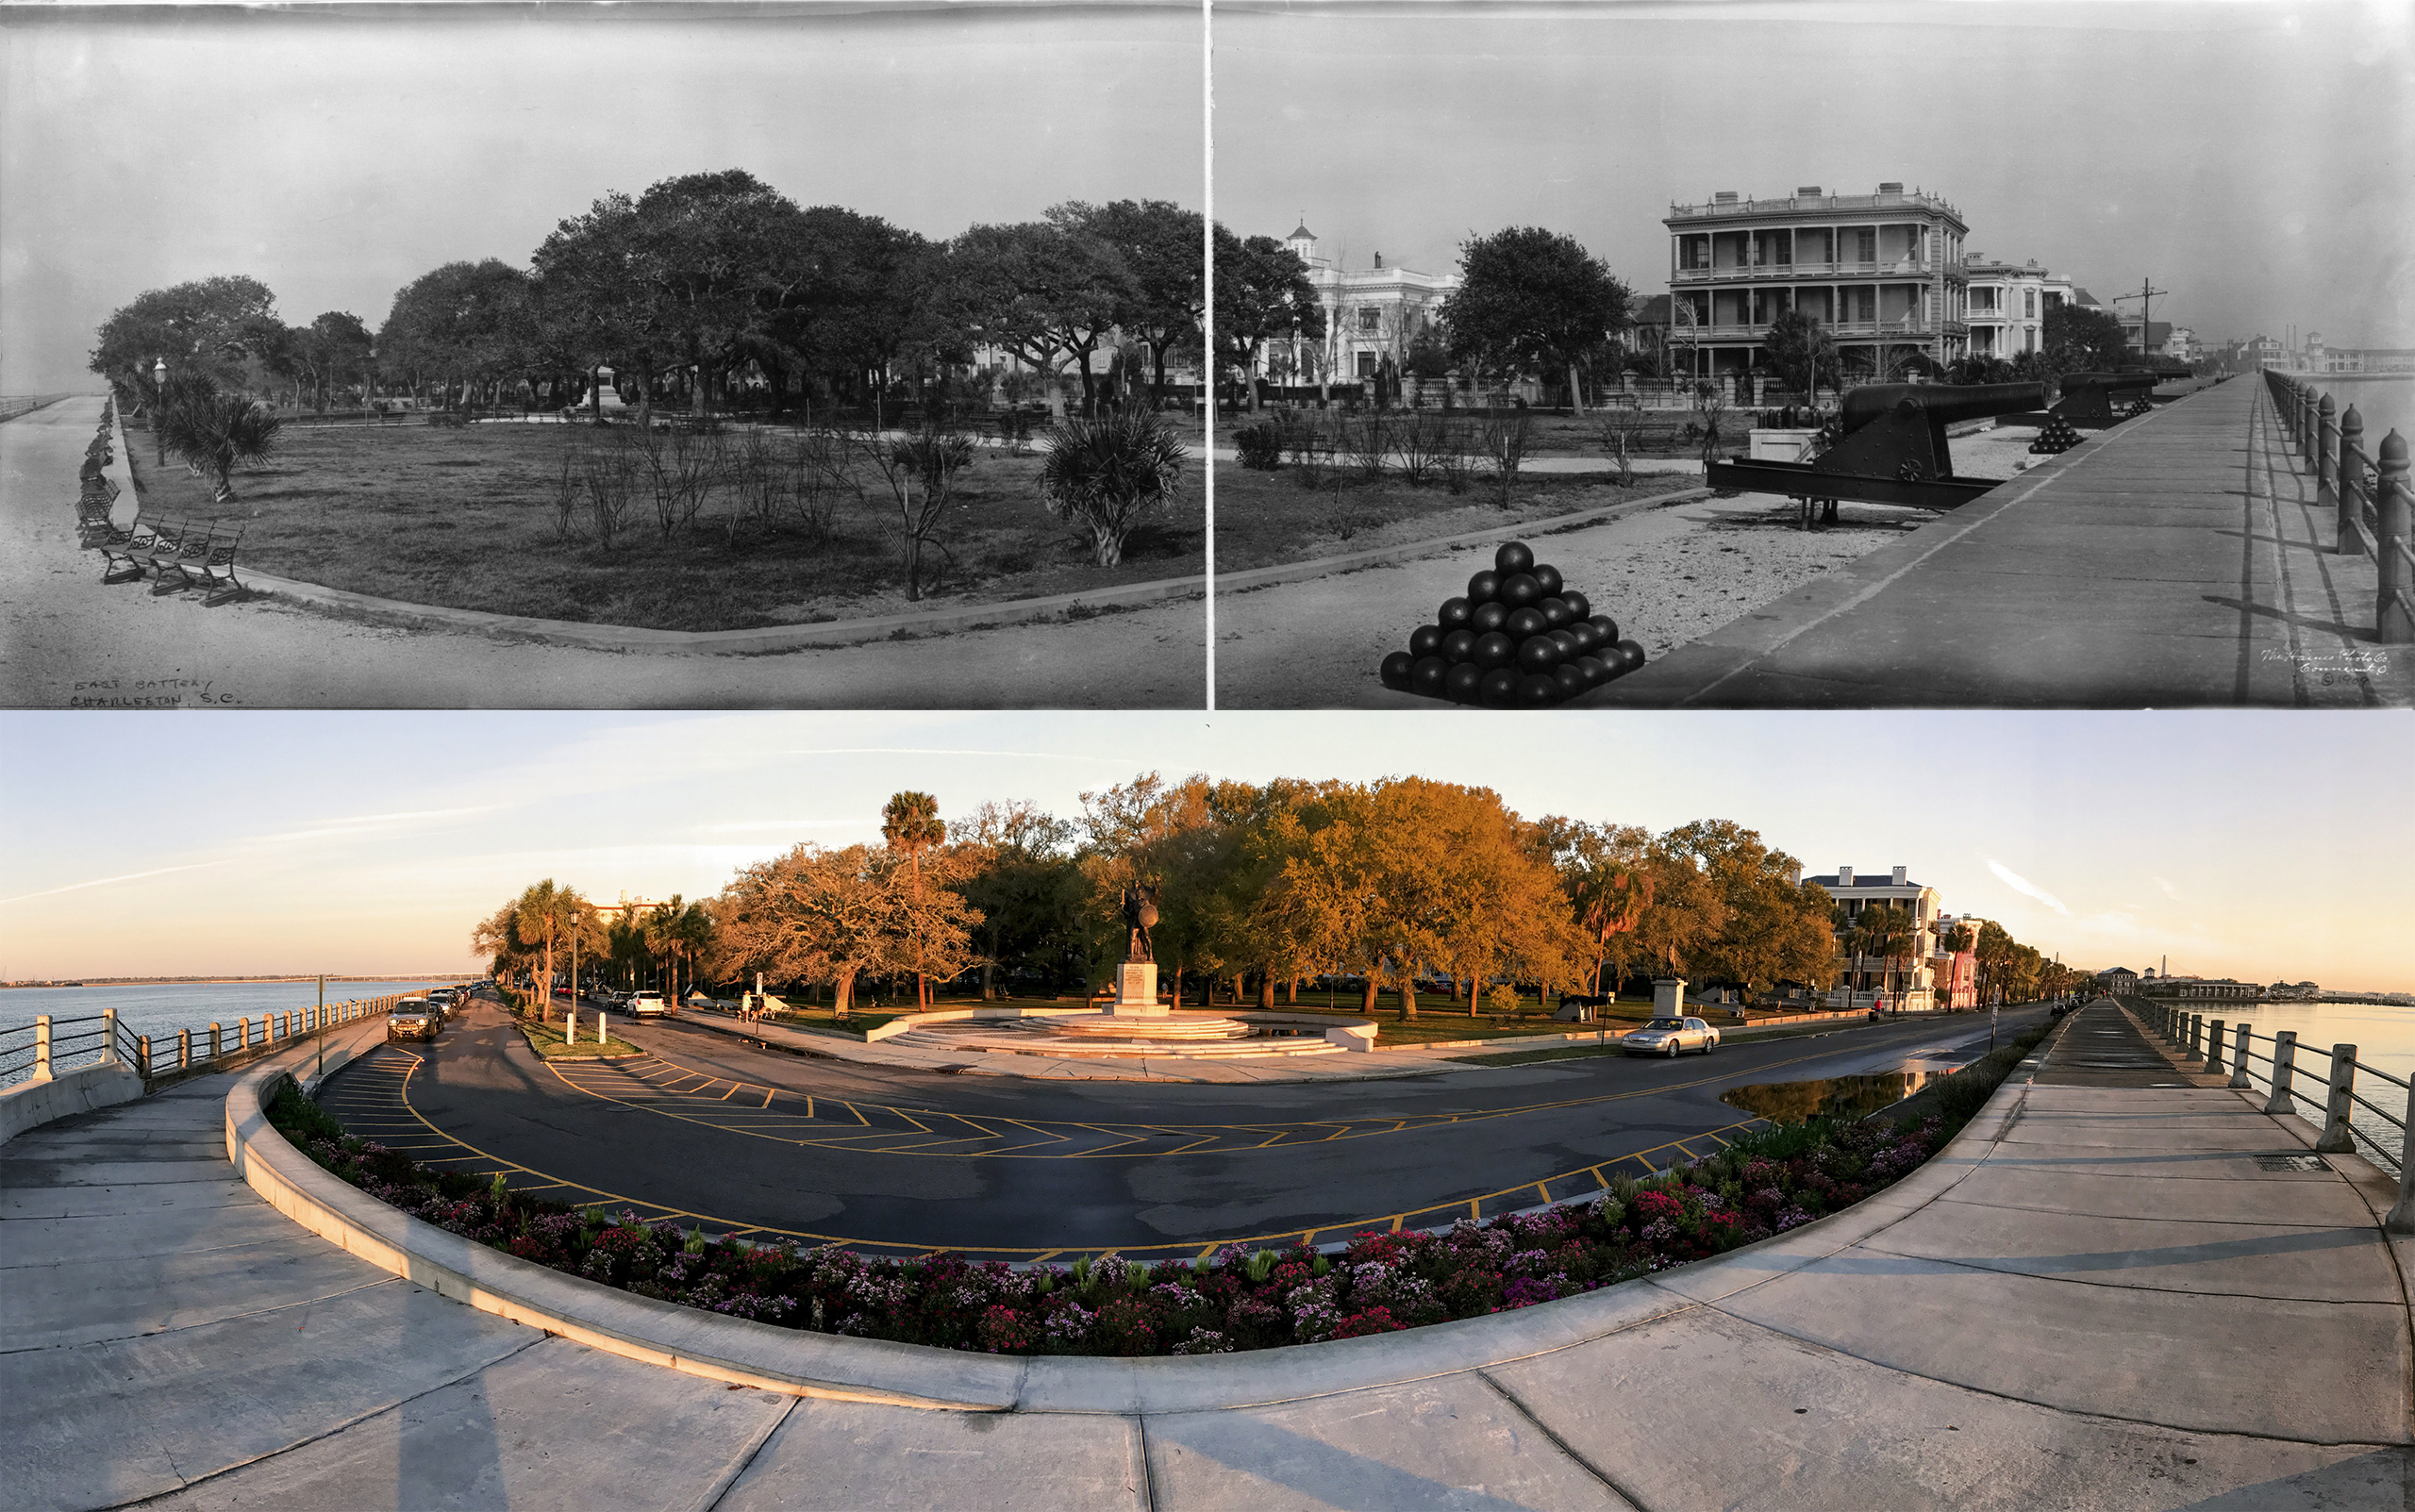 THE BATTERY: The trees in White Point Garden, which was planned by the city in 1837 as a public park, are taller now than in 1909 and block the view of the Villa Margherita on South Battery, which then still had a cupola. There are more monuments, most noticeably the colossal bronze statue dedicated to the Confederate Defenders of Charleston in 1932. The multi-piazza mansion built by Louis DeSaussure in 1858 still commands the waterfront; the heavy guns left from the Civil War-era Battery Ramsay remain peacefully at rest.